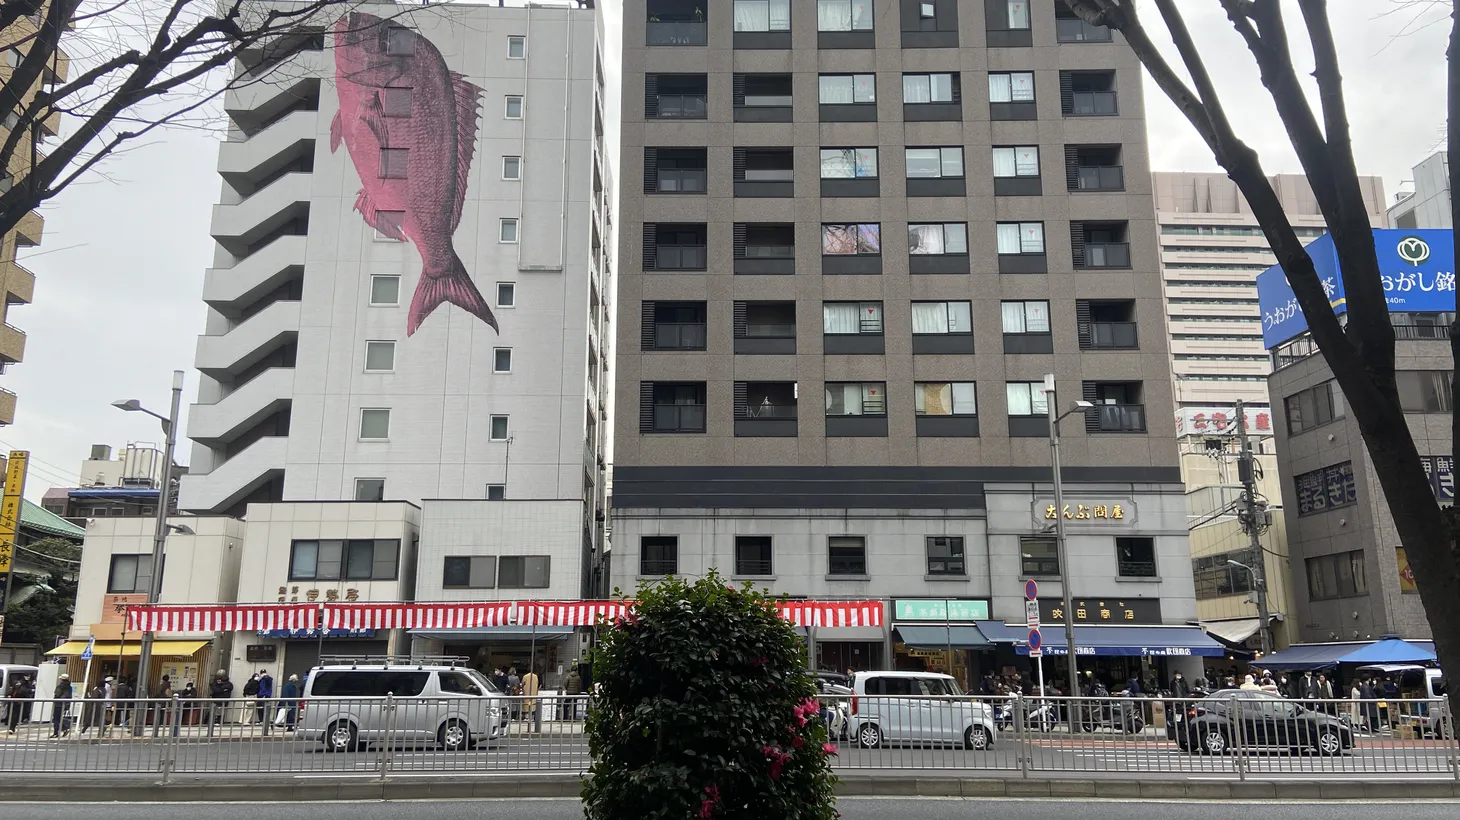 A kinmidae mural is painted on the side of a building outside Tokyo’s famed Tsujiki Market.